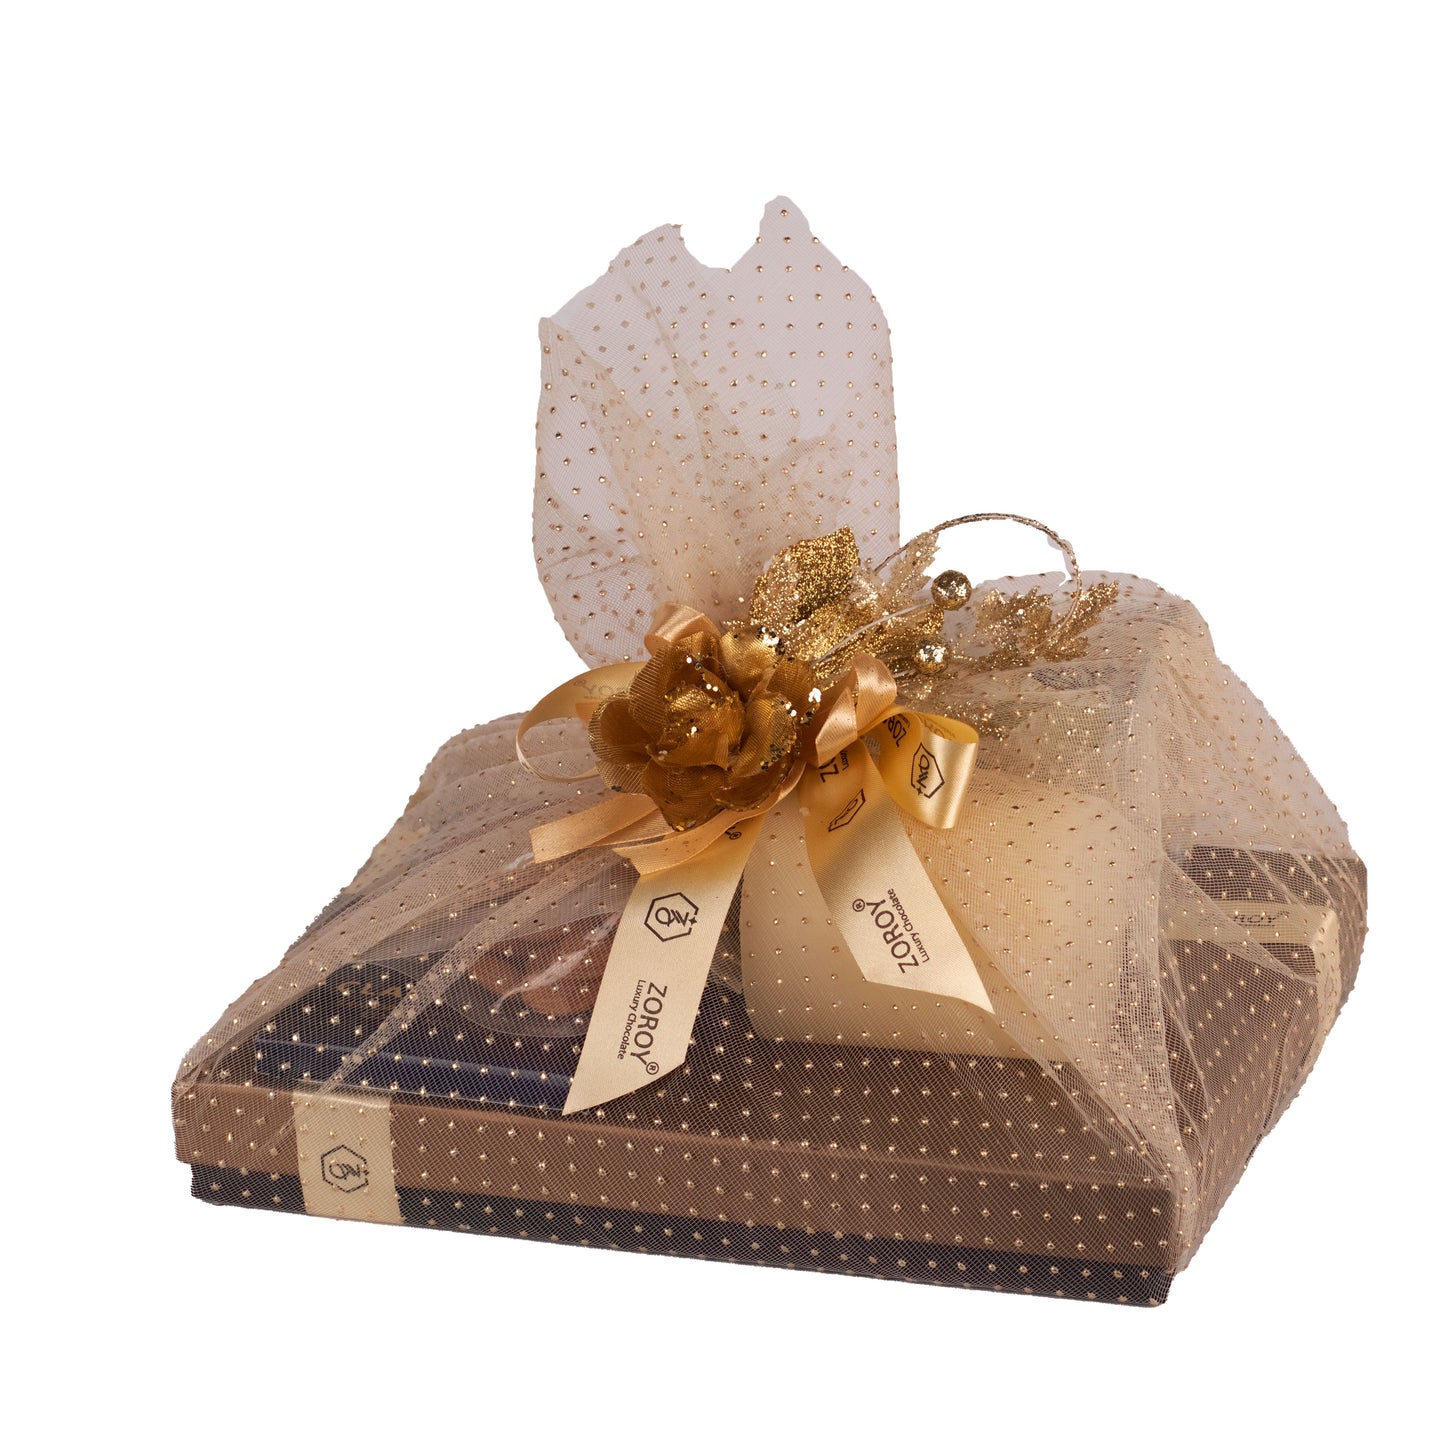 Netted Large Hamper with chocolates, cookies, dry fruits and candle